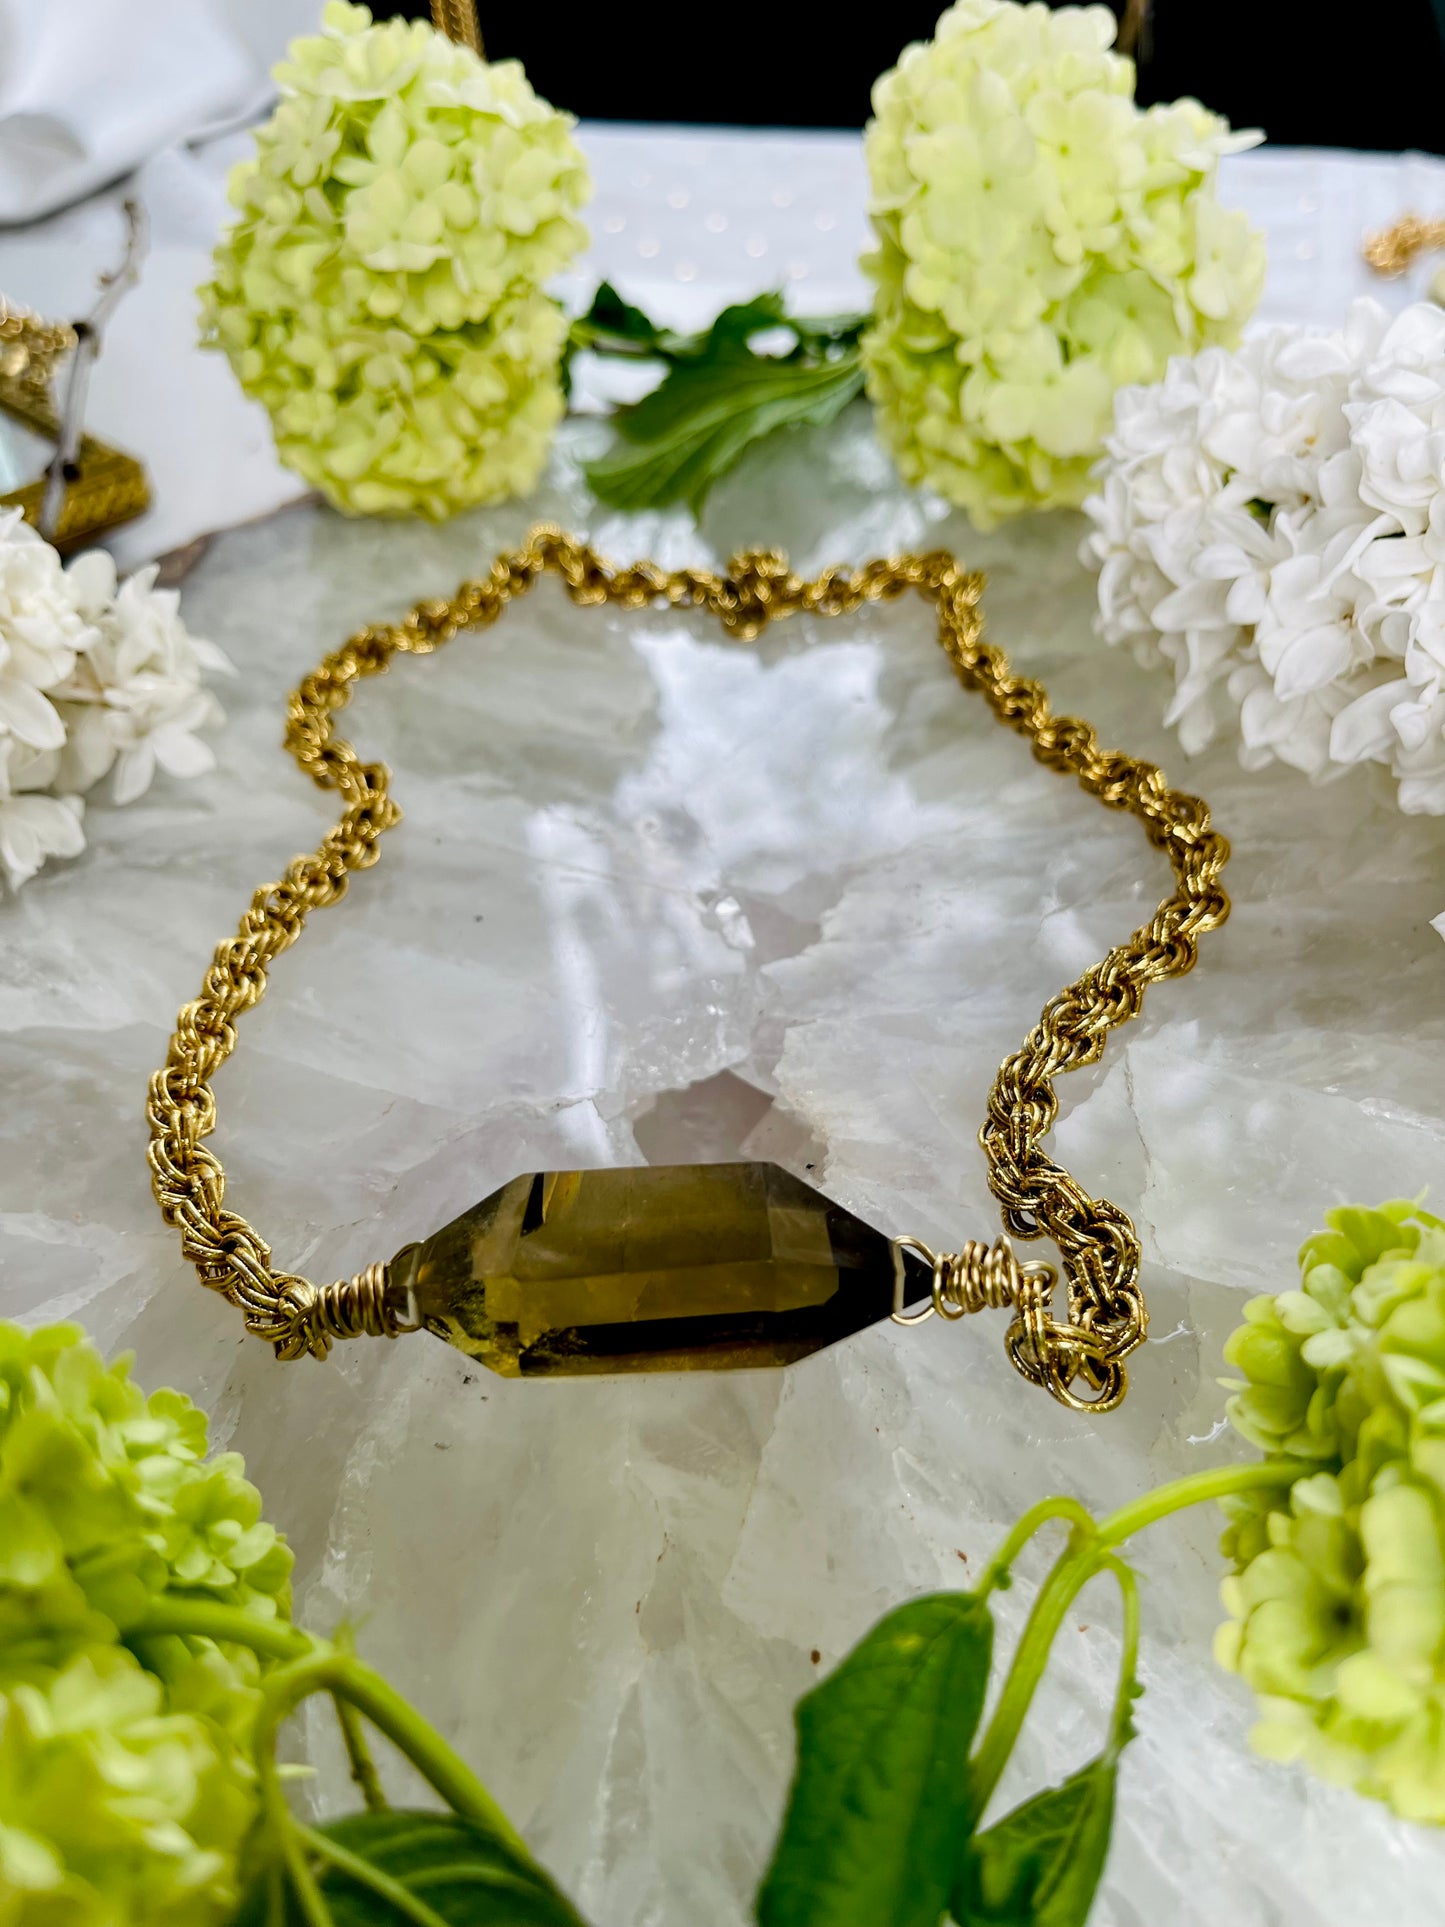 Double Terminated Brilliant Rare Lux Gem Cut Citrine Hand wrapped on vintage reimagined choker chain